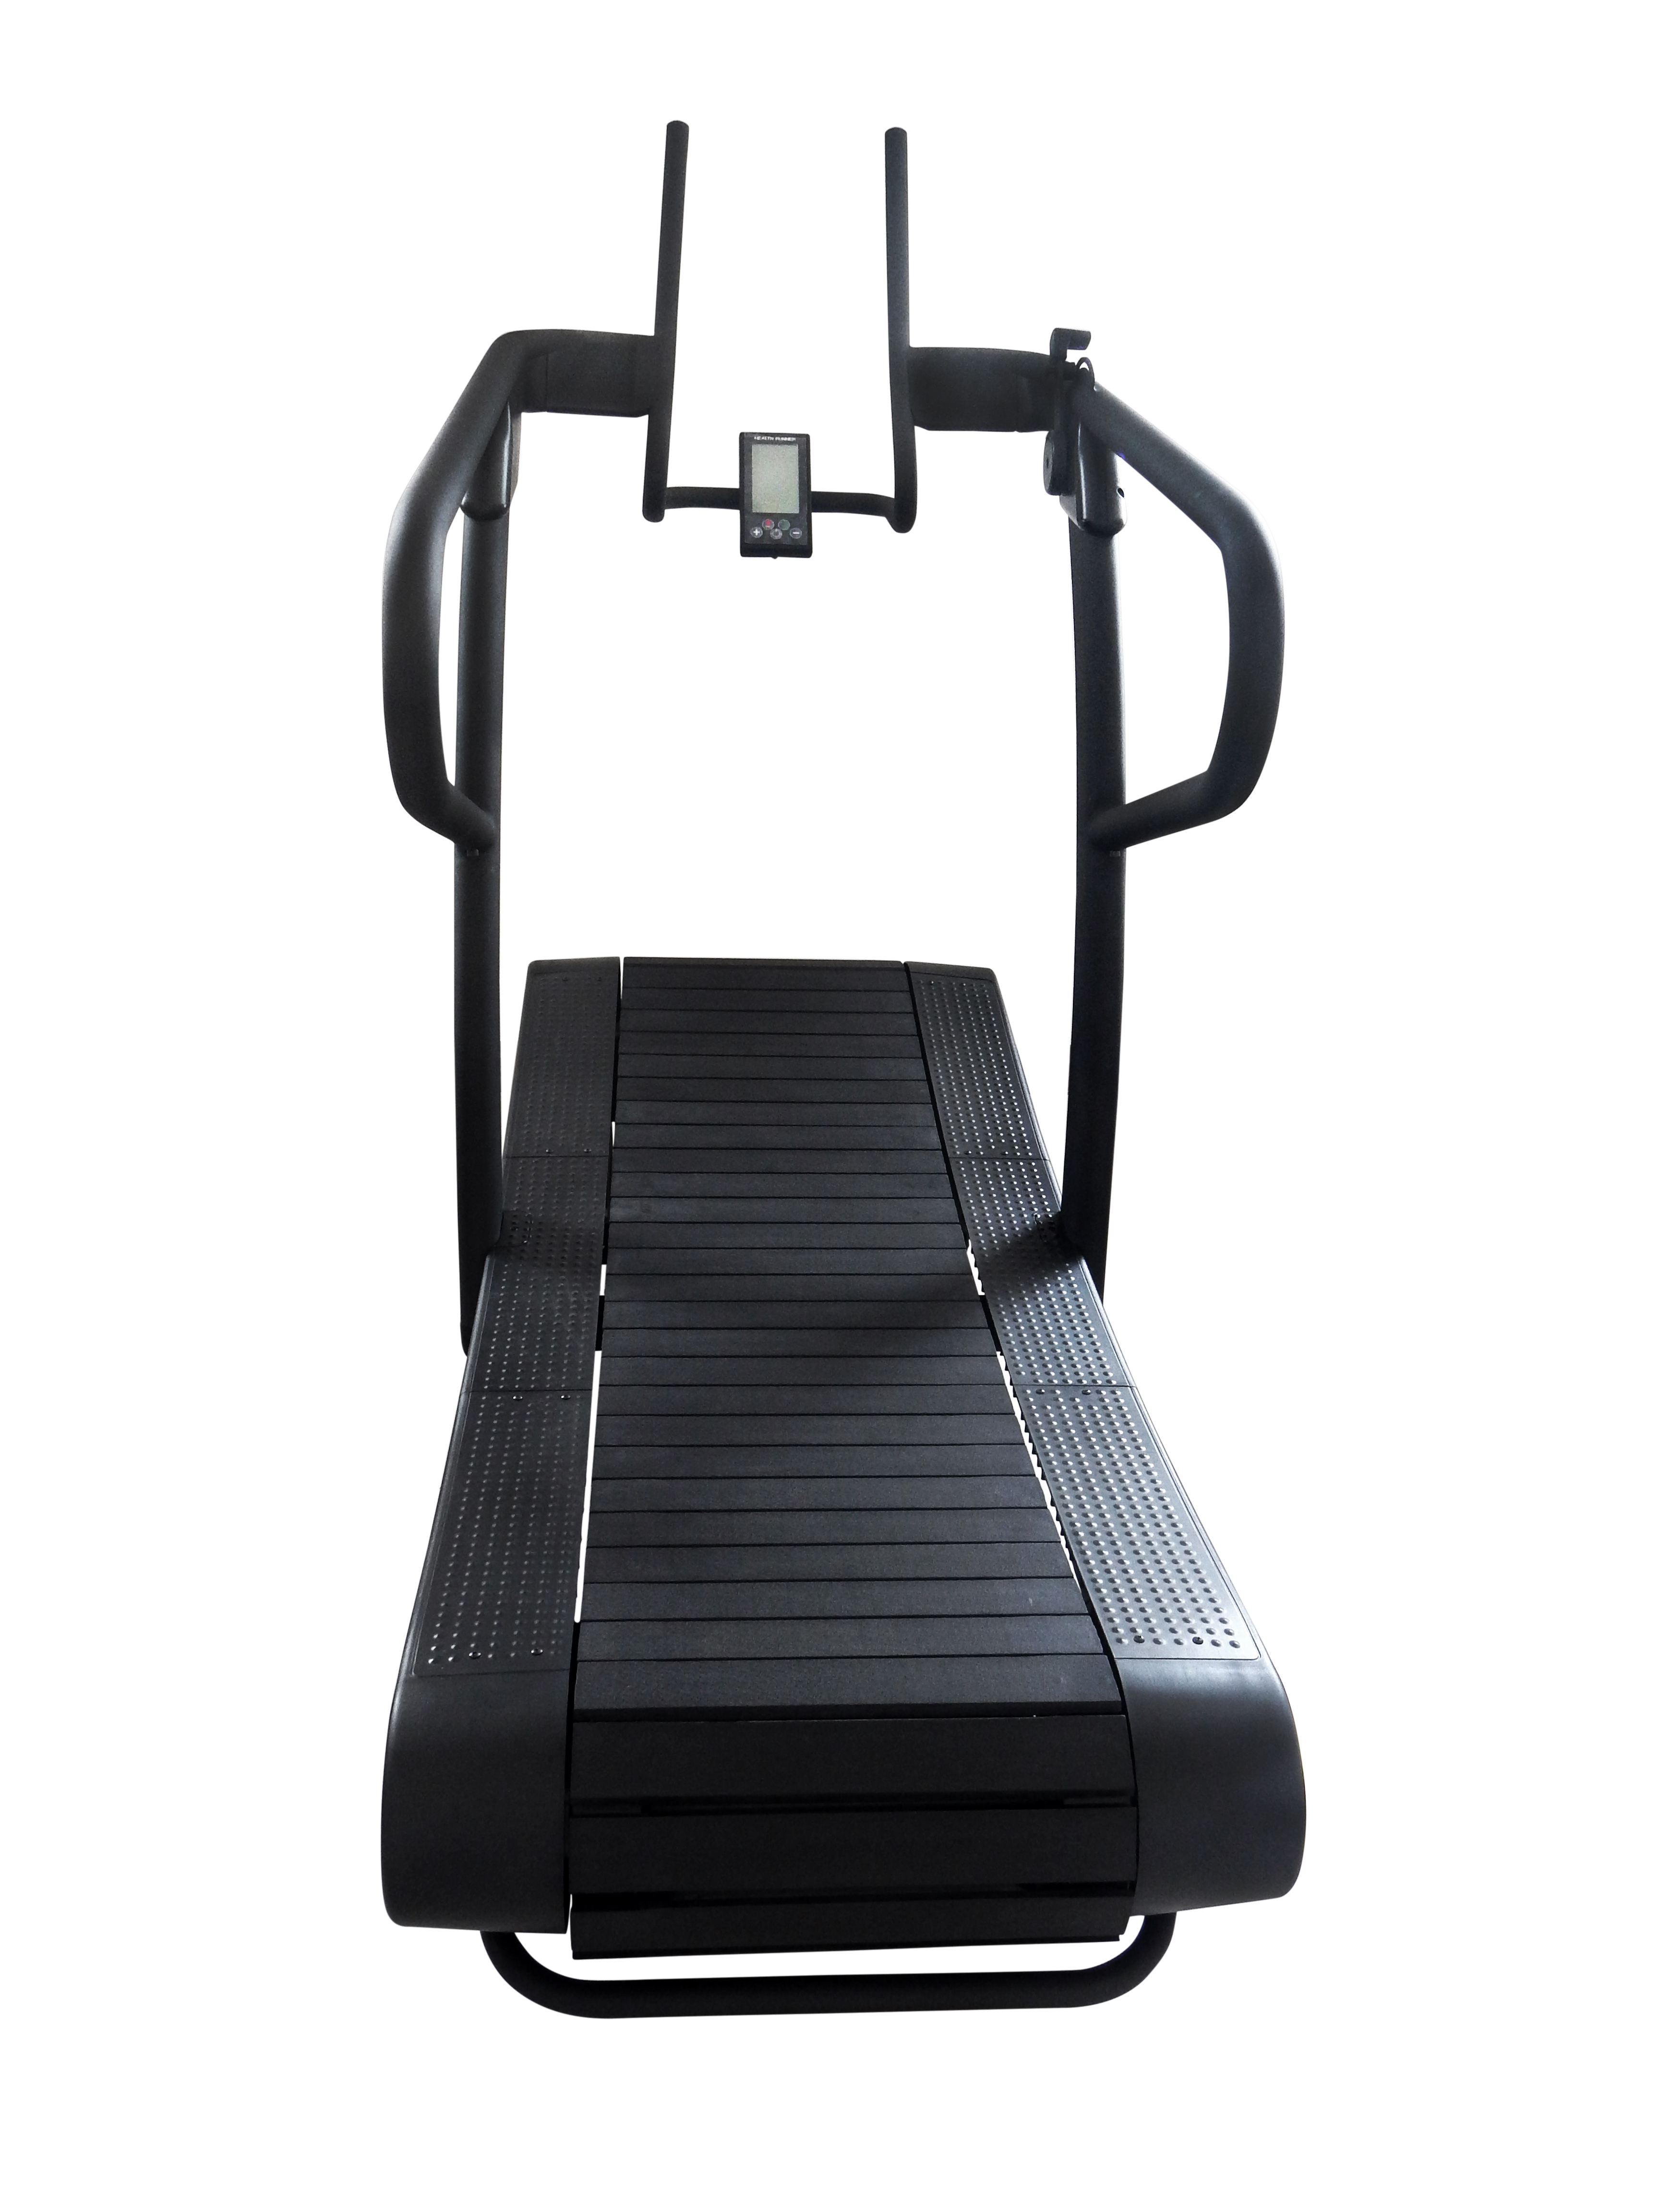 Motorless Durable Park Resistance Curved Treadmill